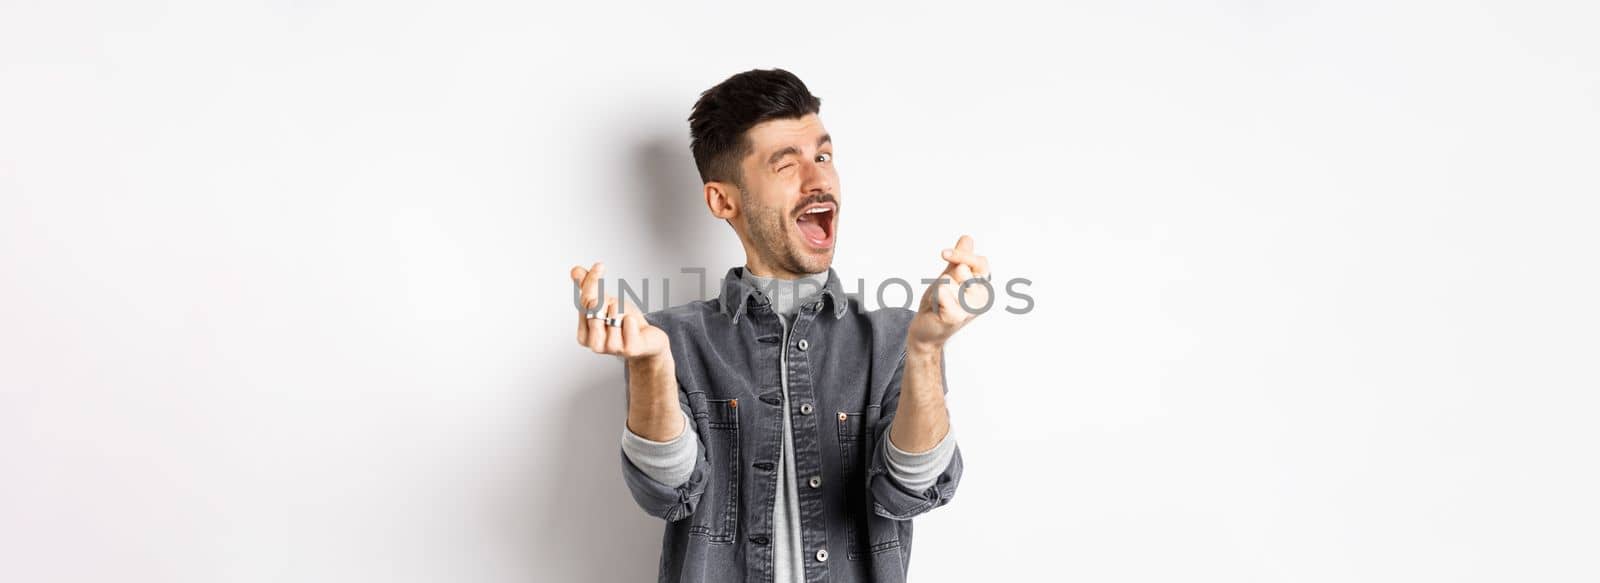 Funny guy winking and showing hand hearts sign, feeling romantic and happy, standing on white background.